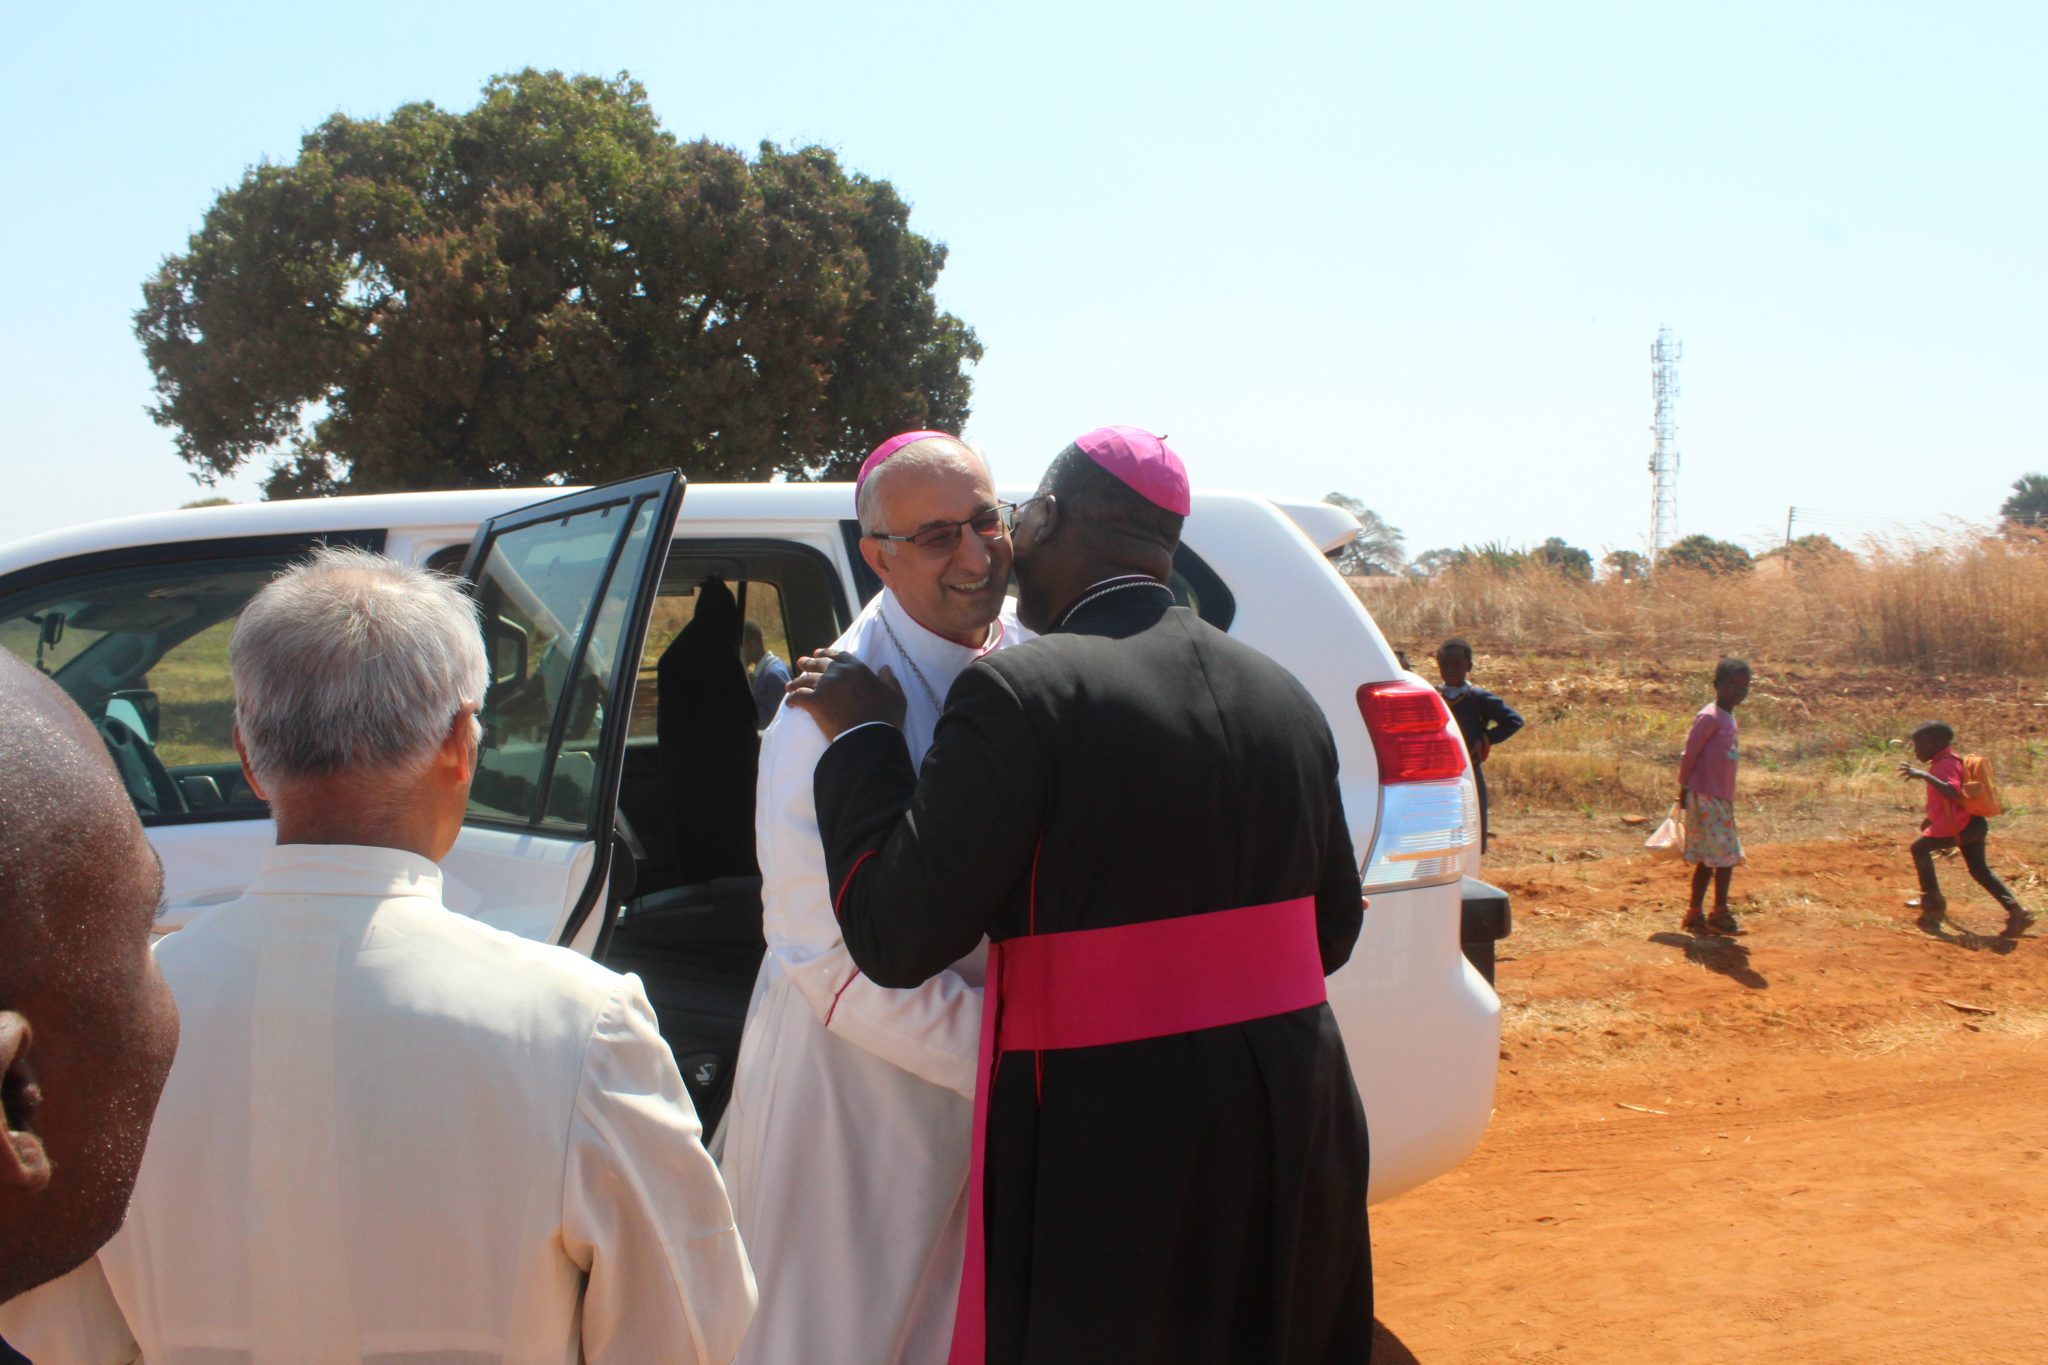 APOSTOLIC NUNCIO TO ZAMBIA’S 1ST VISITS TO NDOLA DIOCESE-[in pictures]